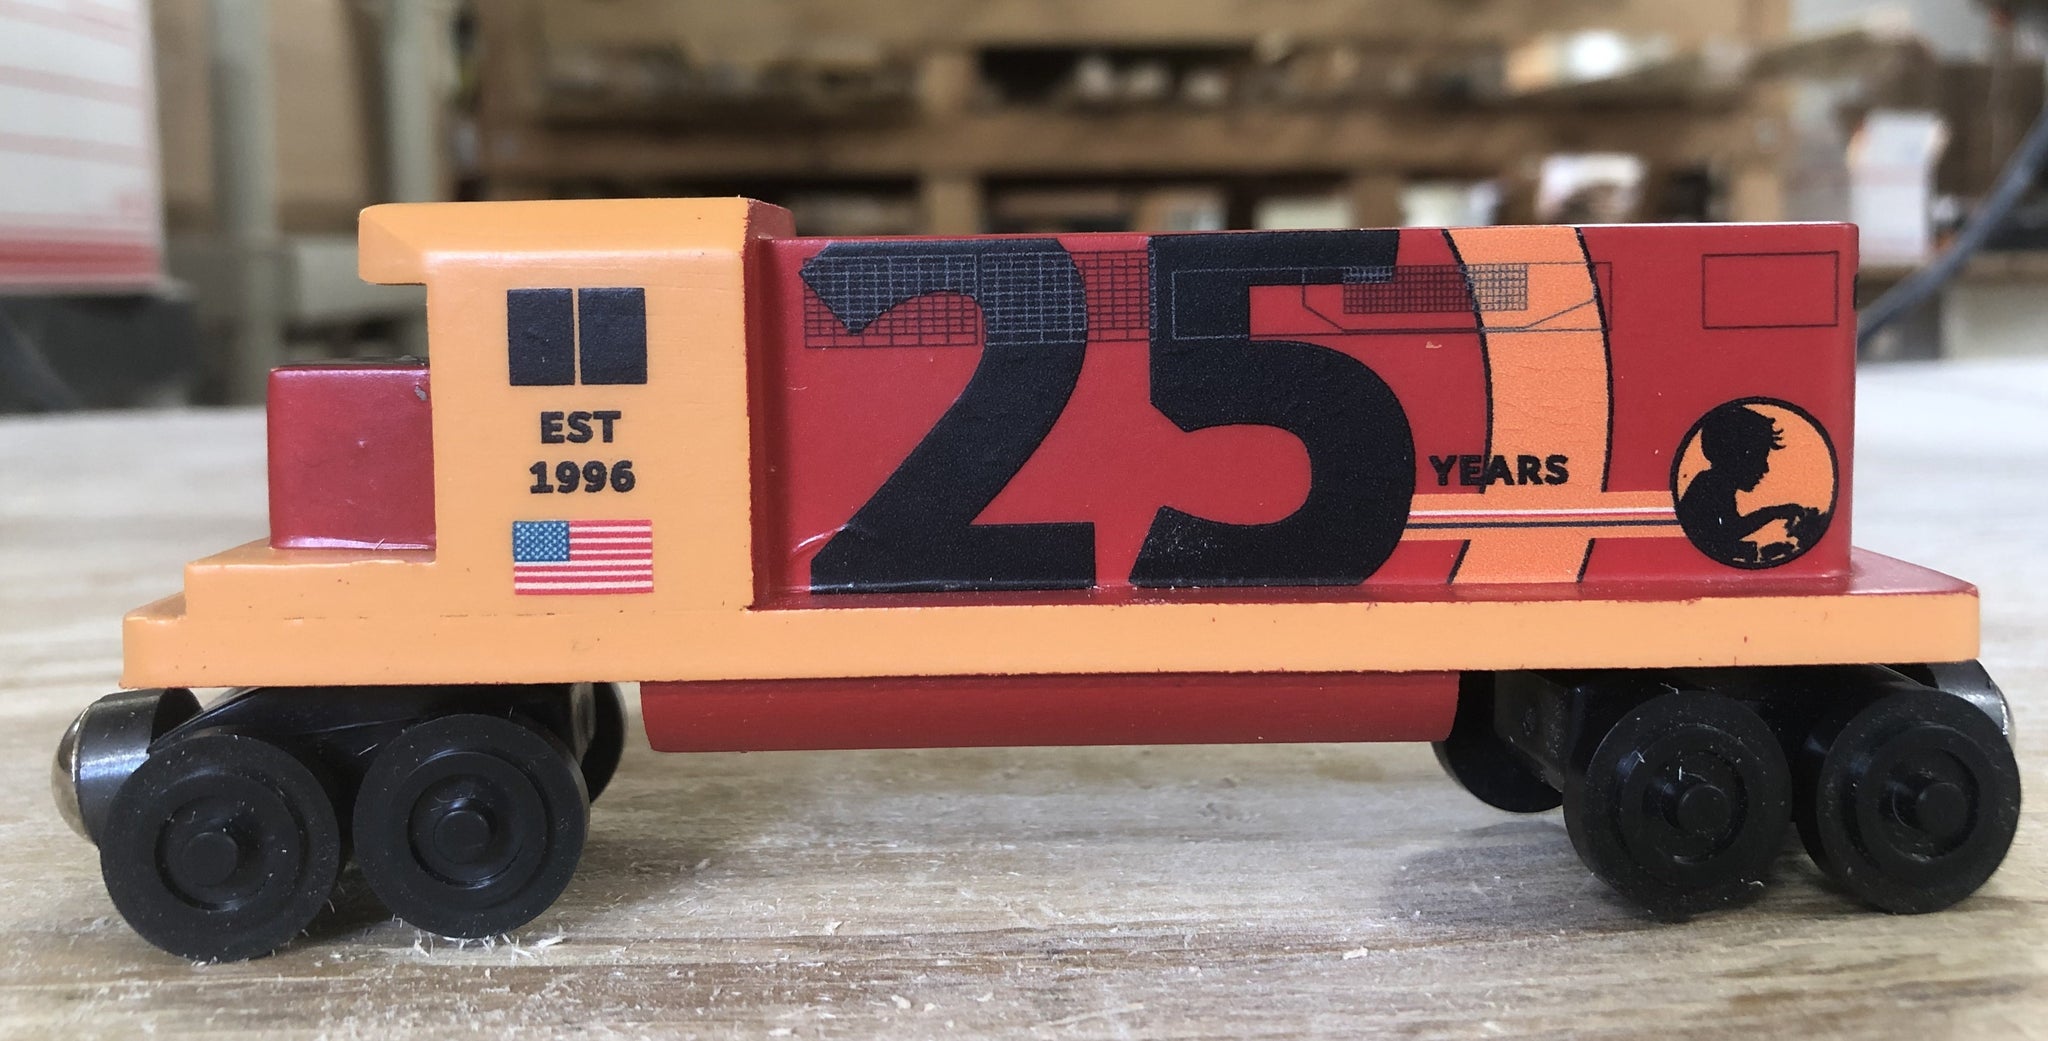 "25 Years" Commemorative Engine by Whittle Shortline Railroad